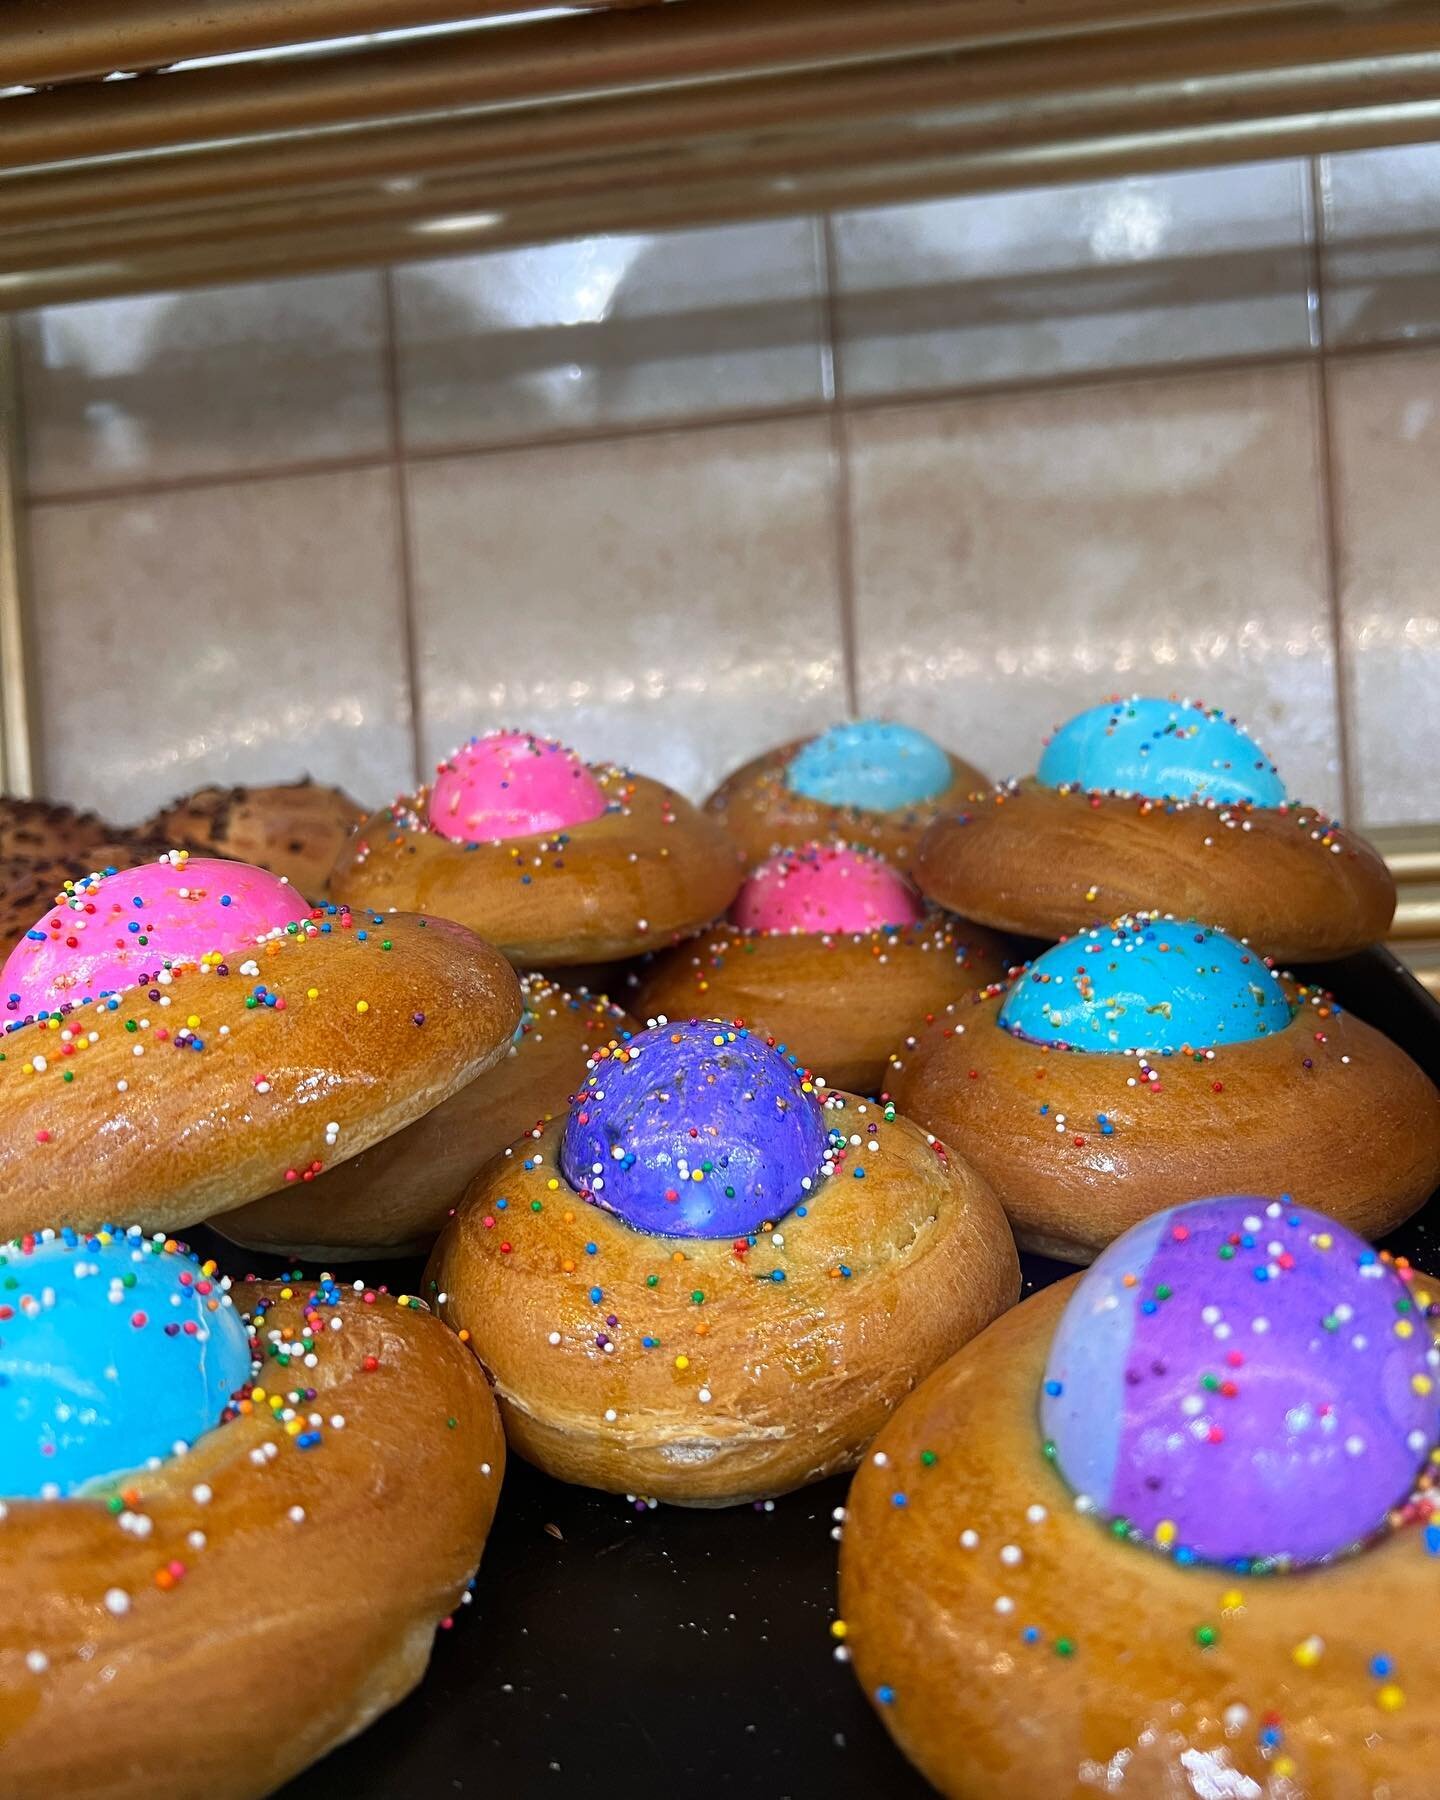 Easter egg bread! Make sure to come grab some before we close! We are here until 2pm! 🐥 🐰 
-
-
#eggbread #easter #happyeaster #bakery #longisland